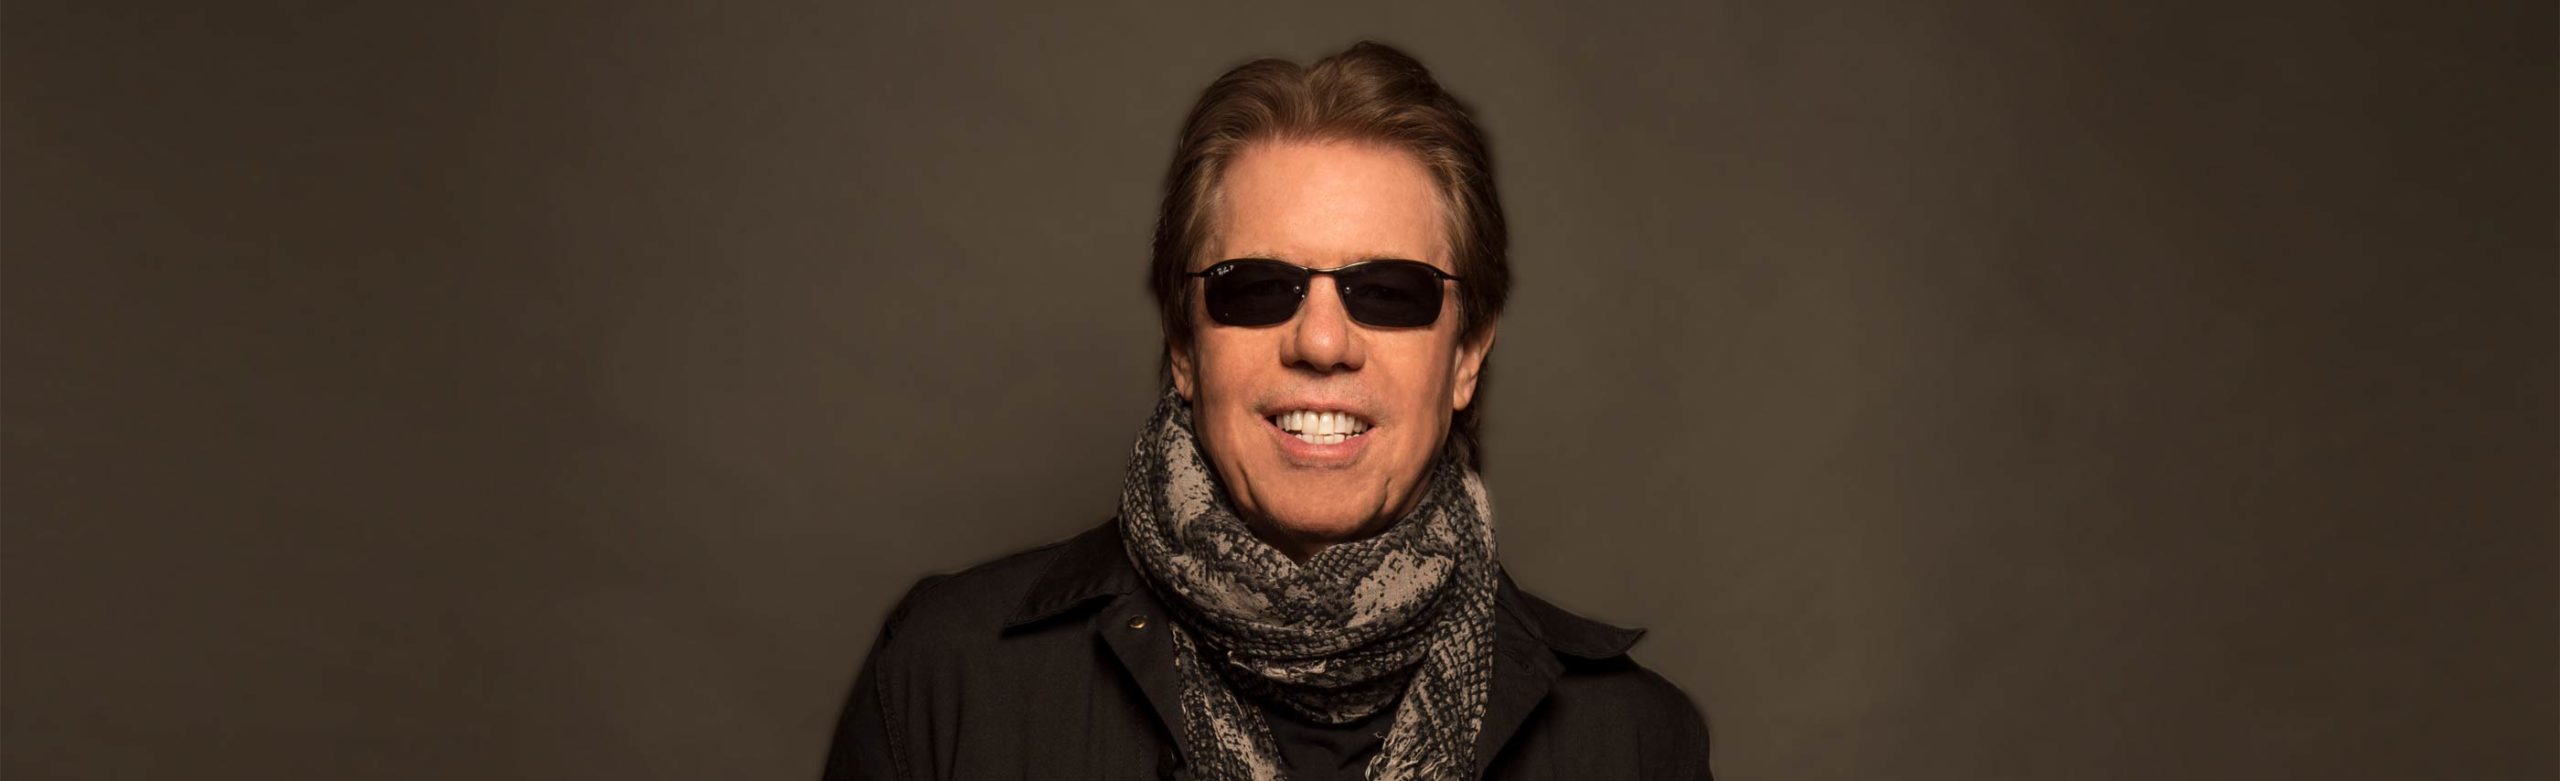 George Thorogood & The Destroyers Announce Return to Missoula Image